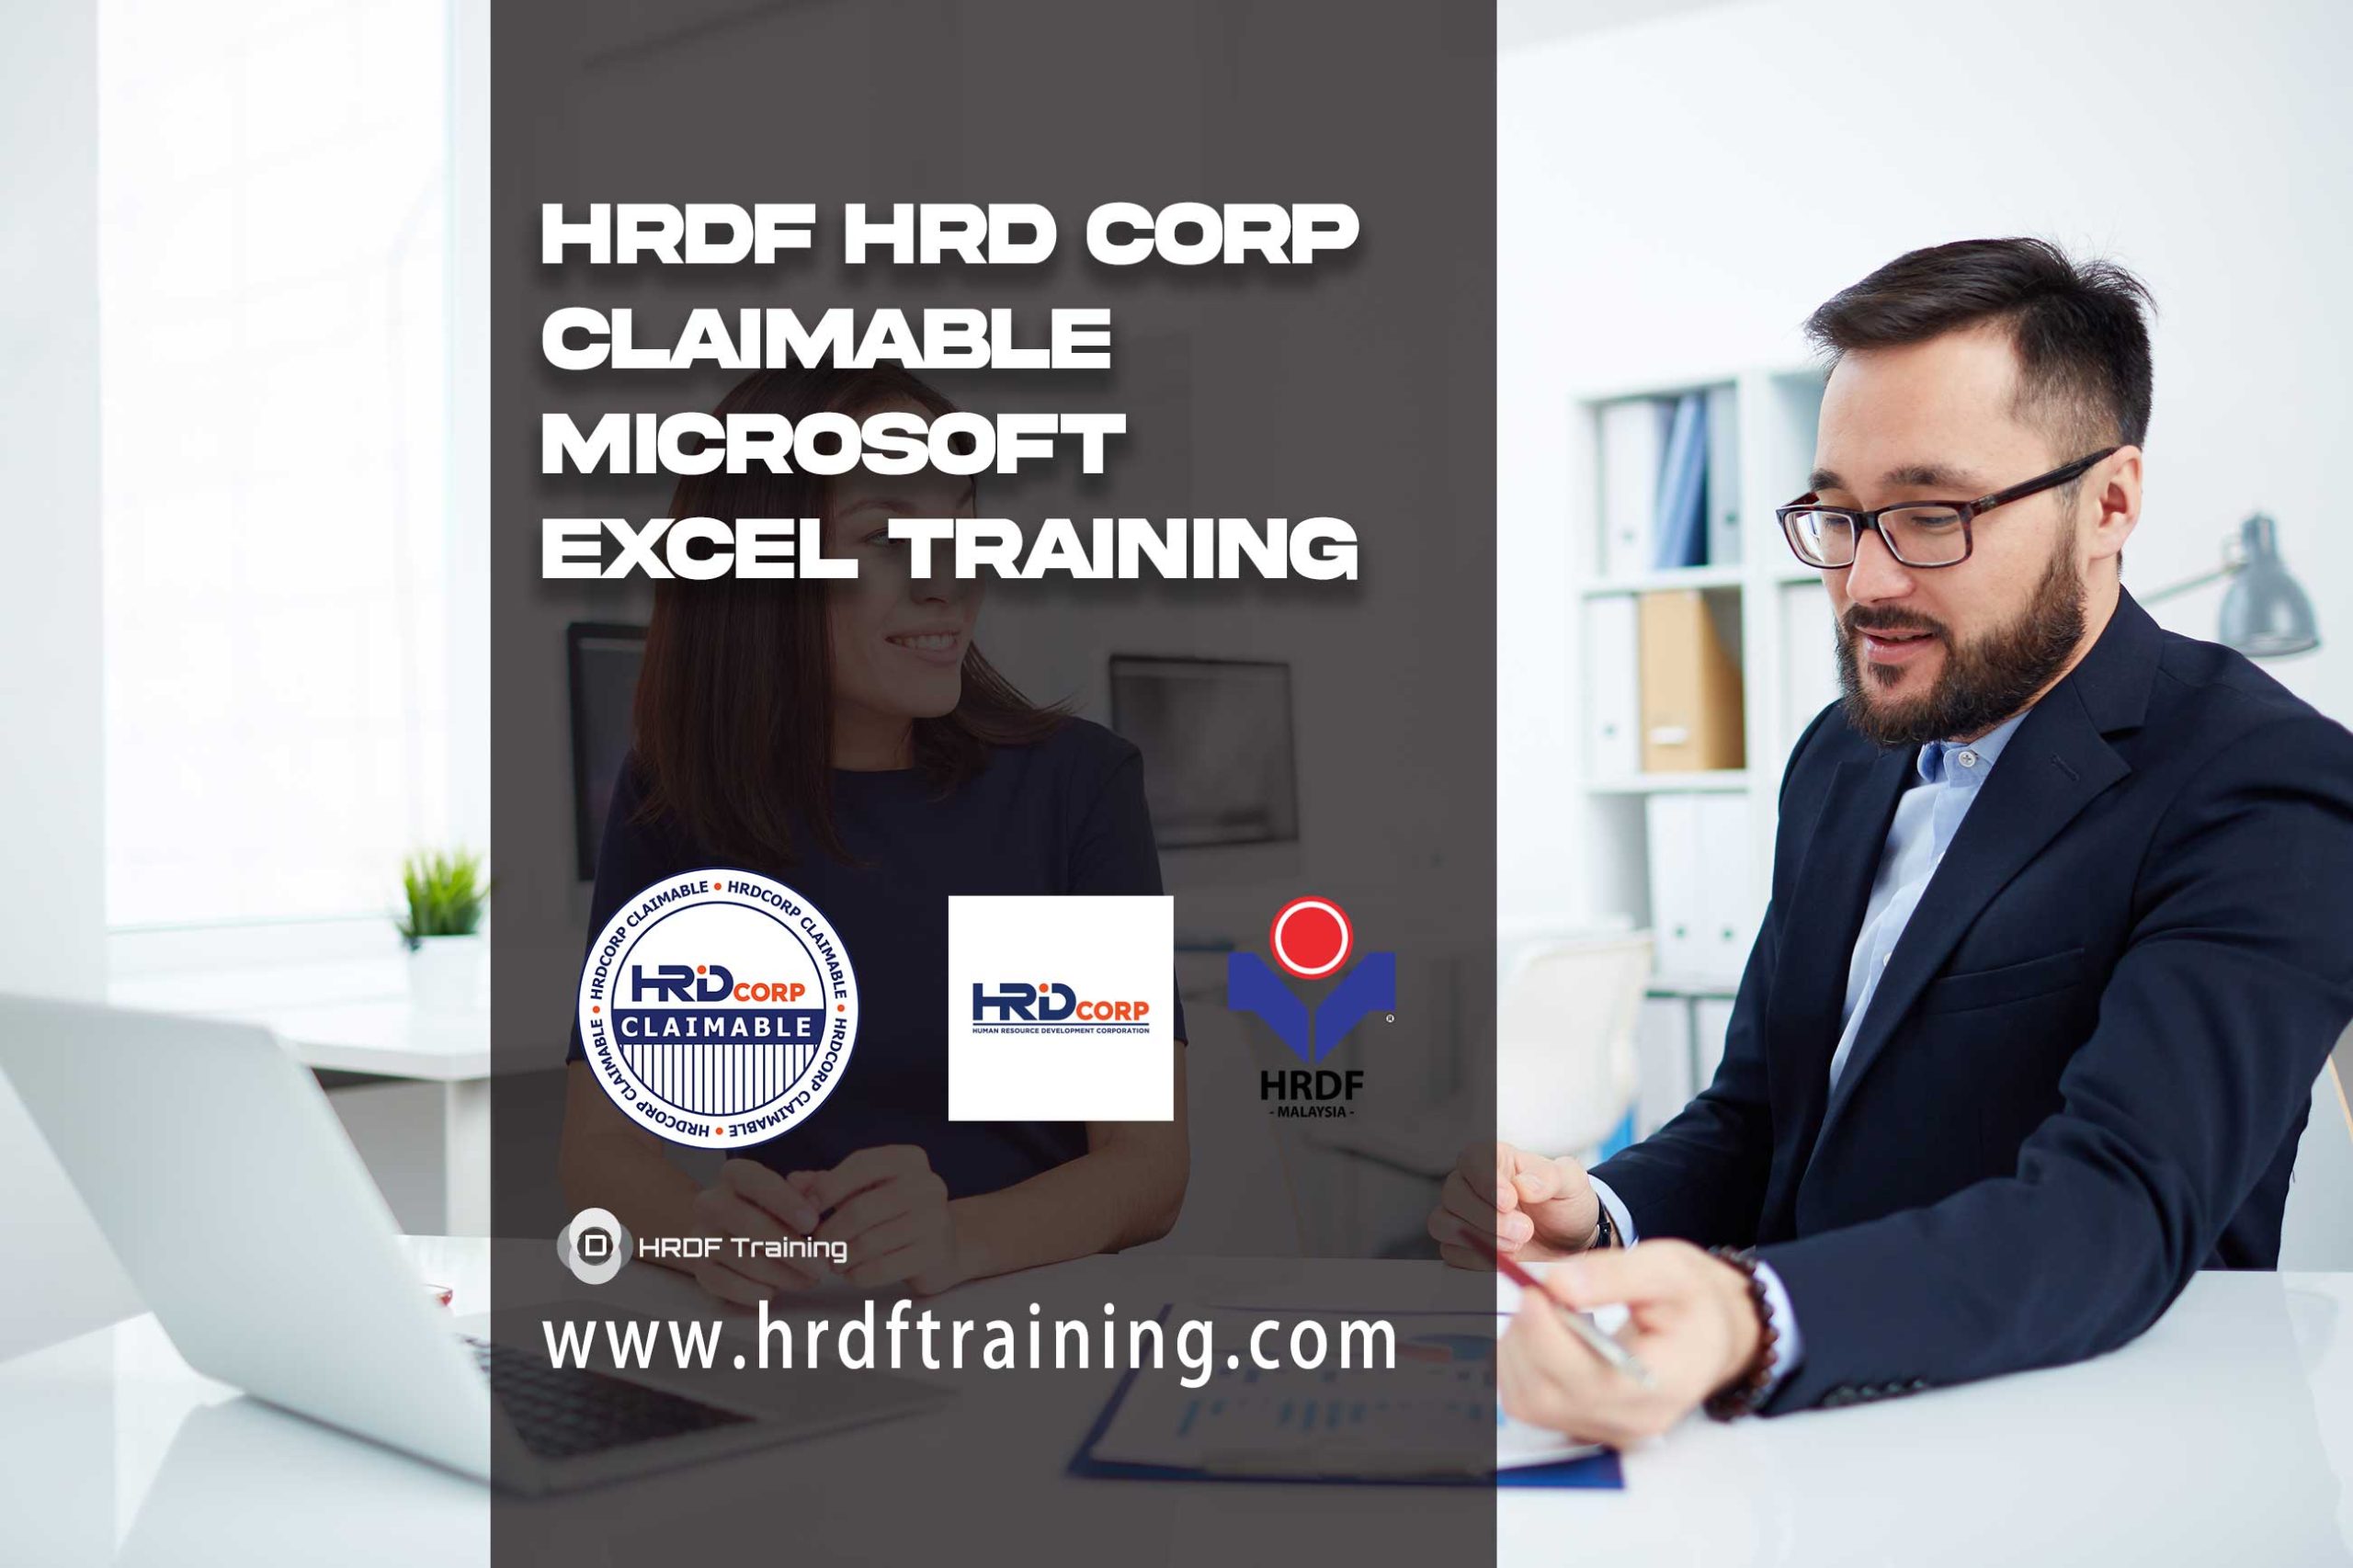 HRDF-HRD-Corp-Claimable-Microsoft-Excel-Training